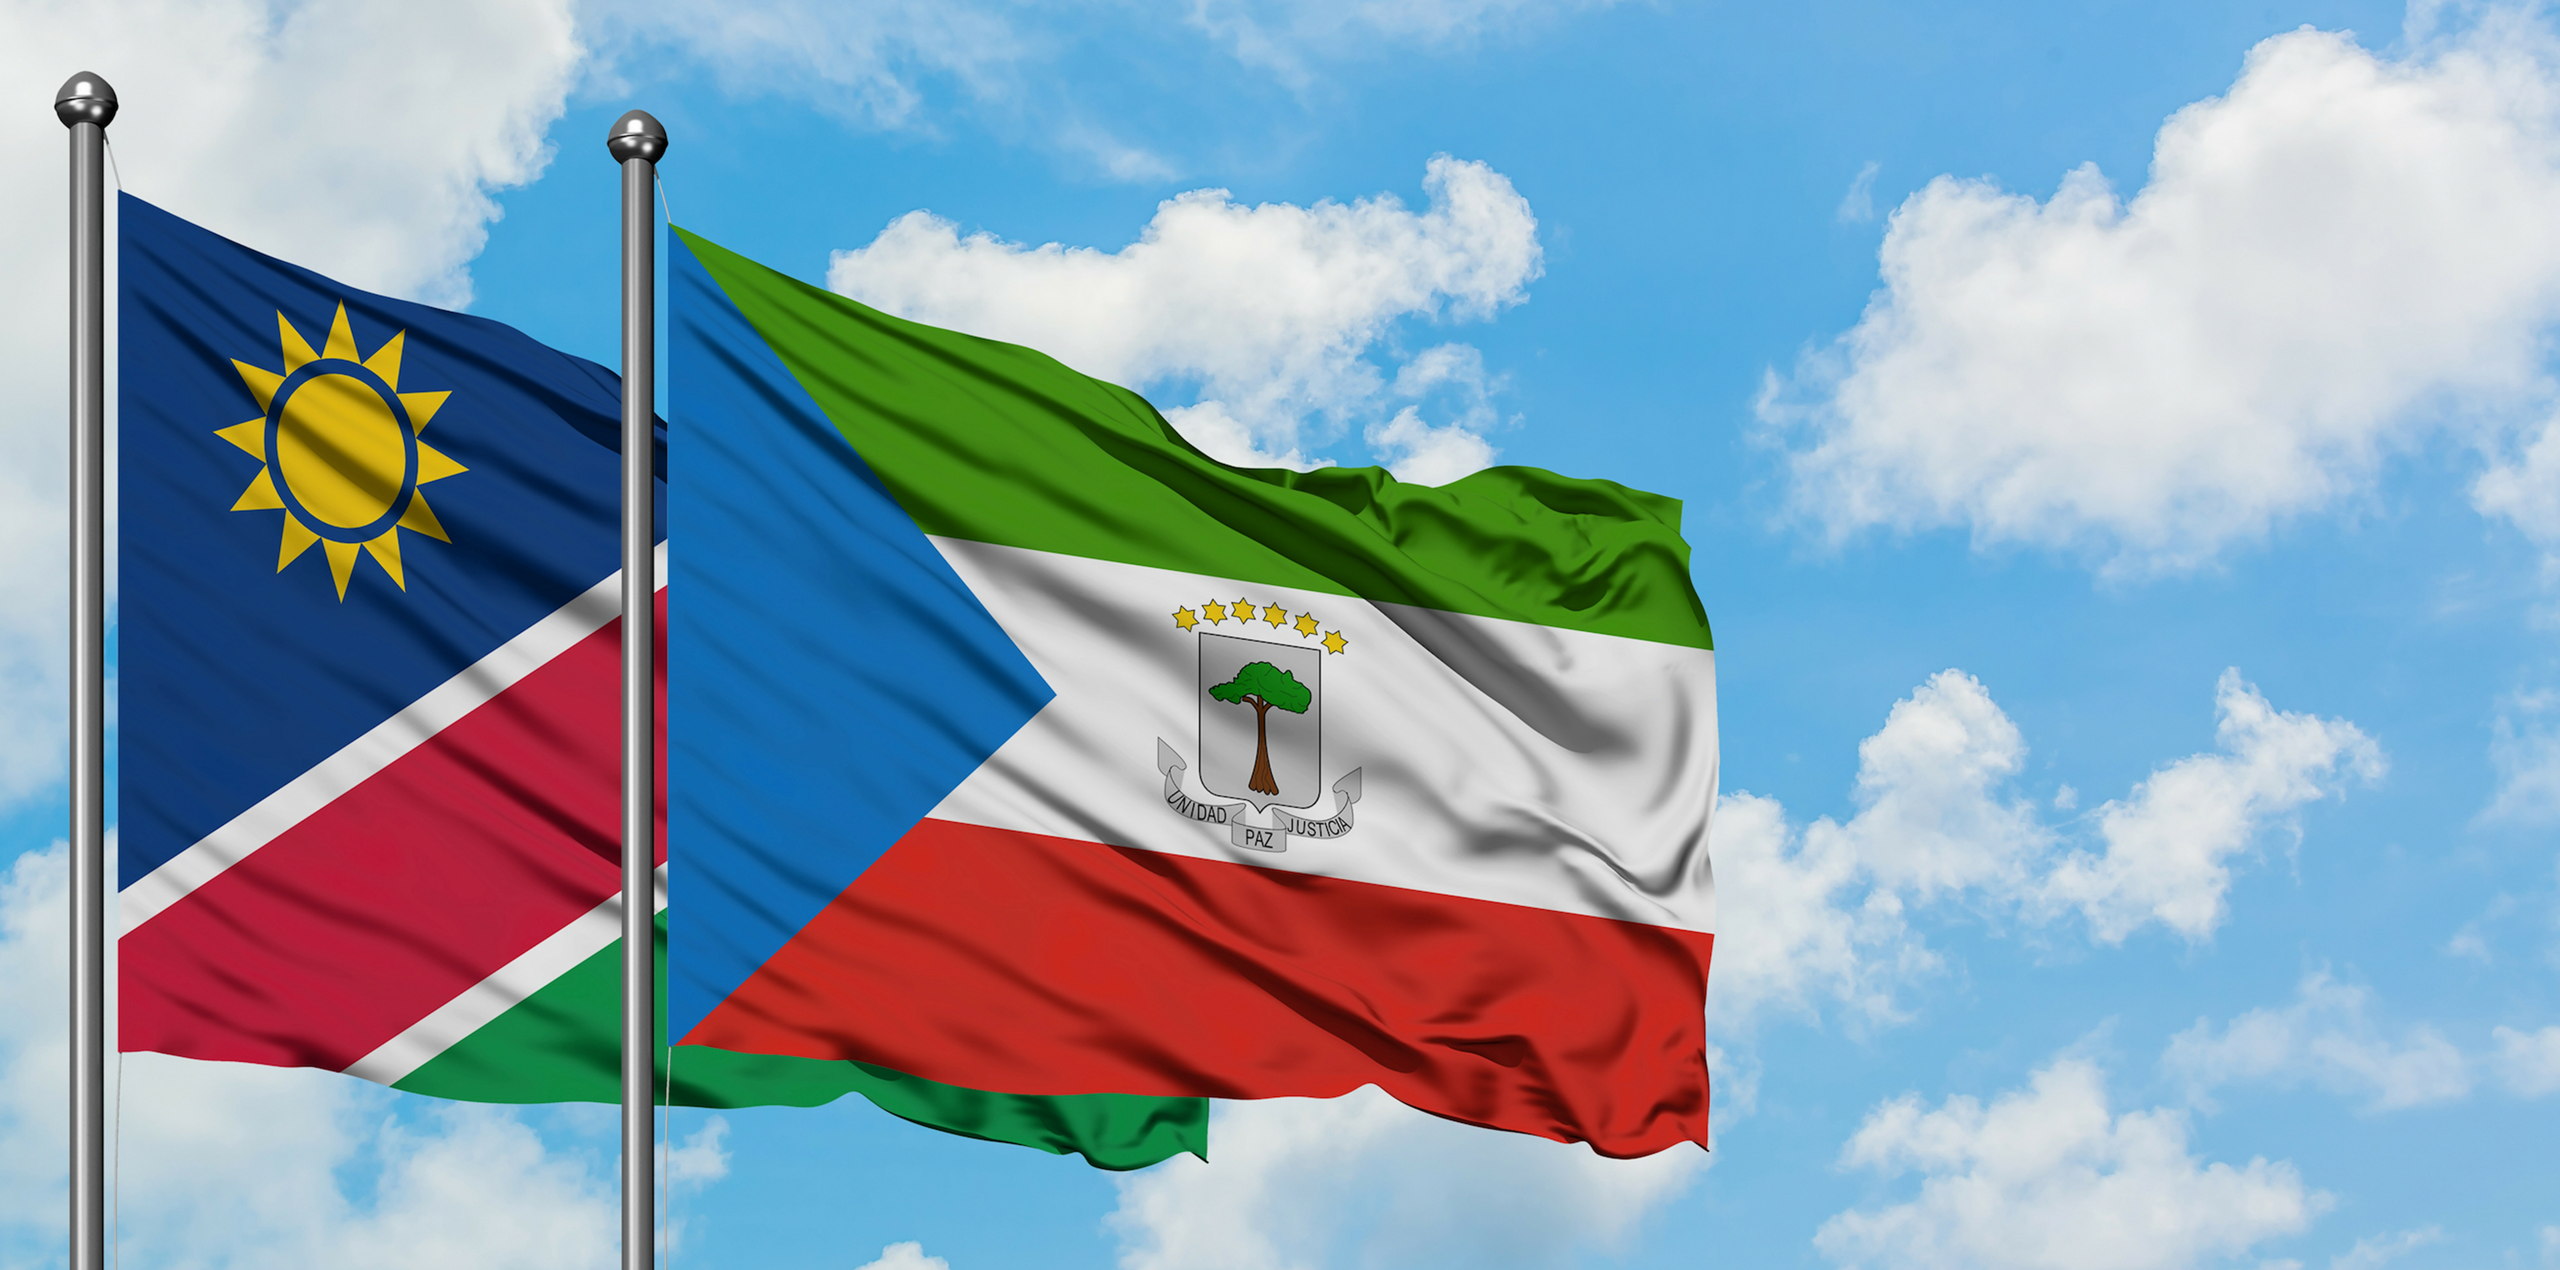 Namibia, Equatorial Guinea boost energy ties, focus on LNG knowledge-sharing